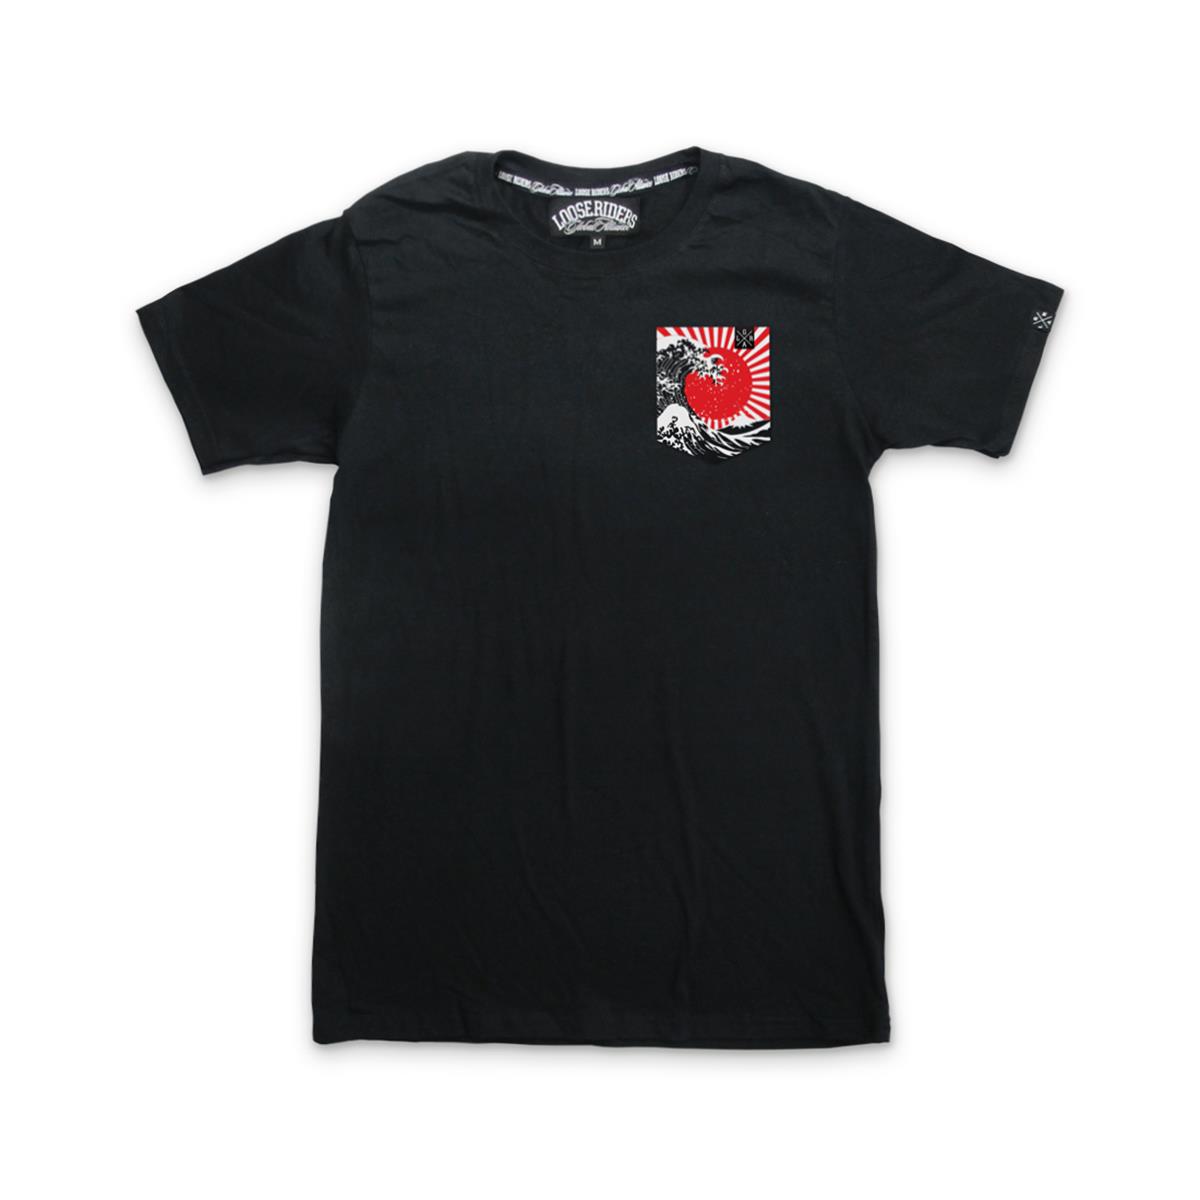 Loose Riders T-Shirt Cult of Shred Rising Sun - Black/Red